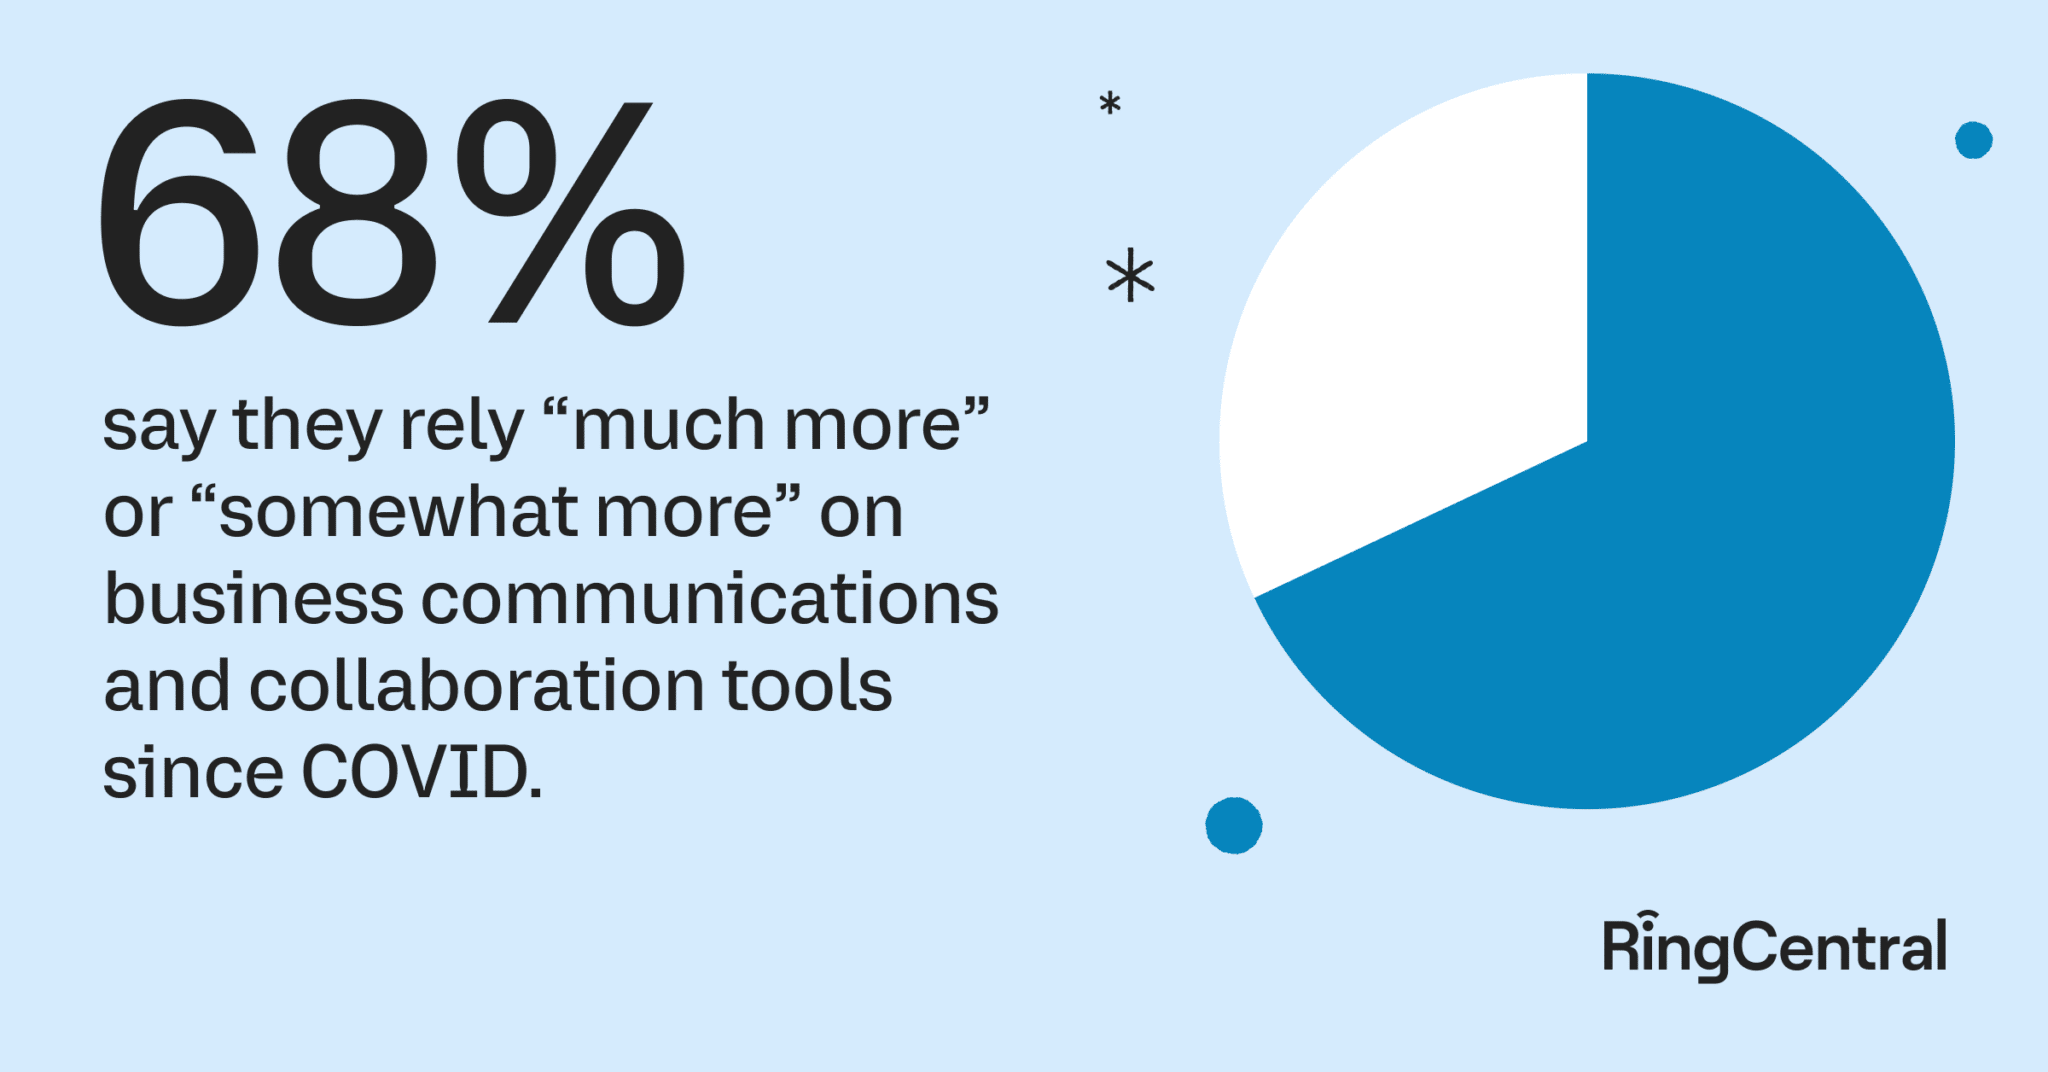 state of human connections report 68% say they rely “much more” or “somewhat more” on business communications and collaboration tools since COVID.